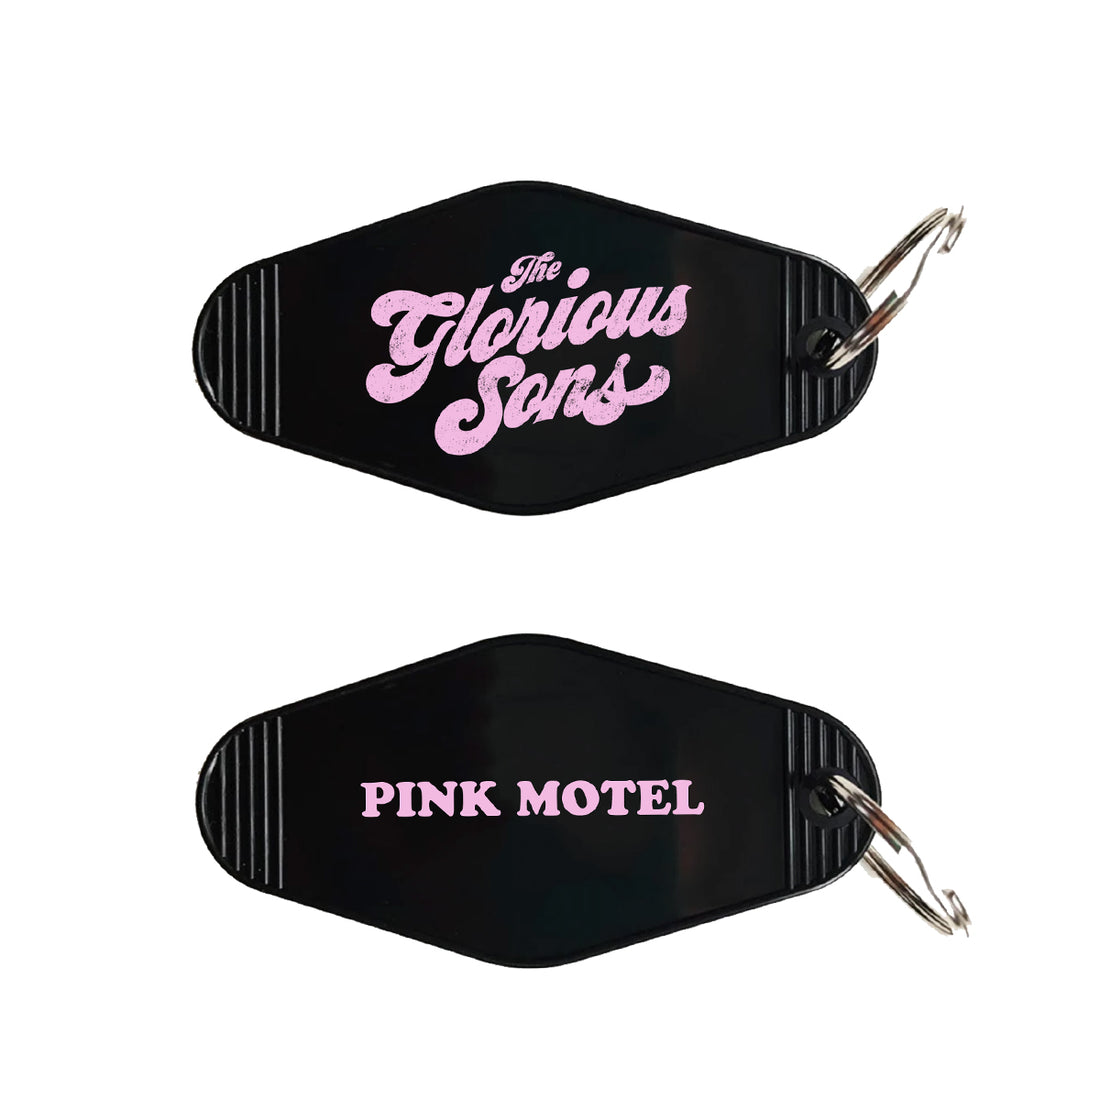 The Glorious Sons - Pink Motel - Key Chain